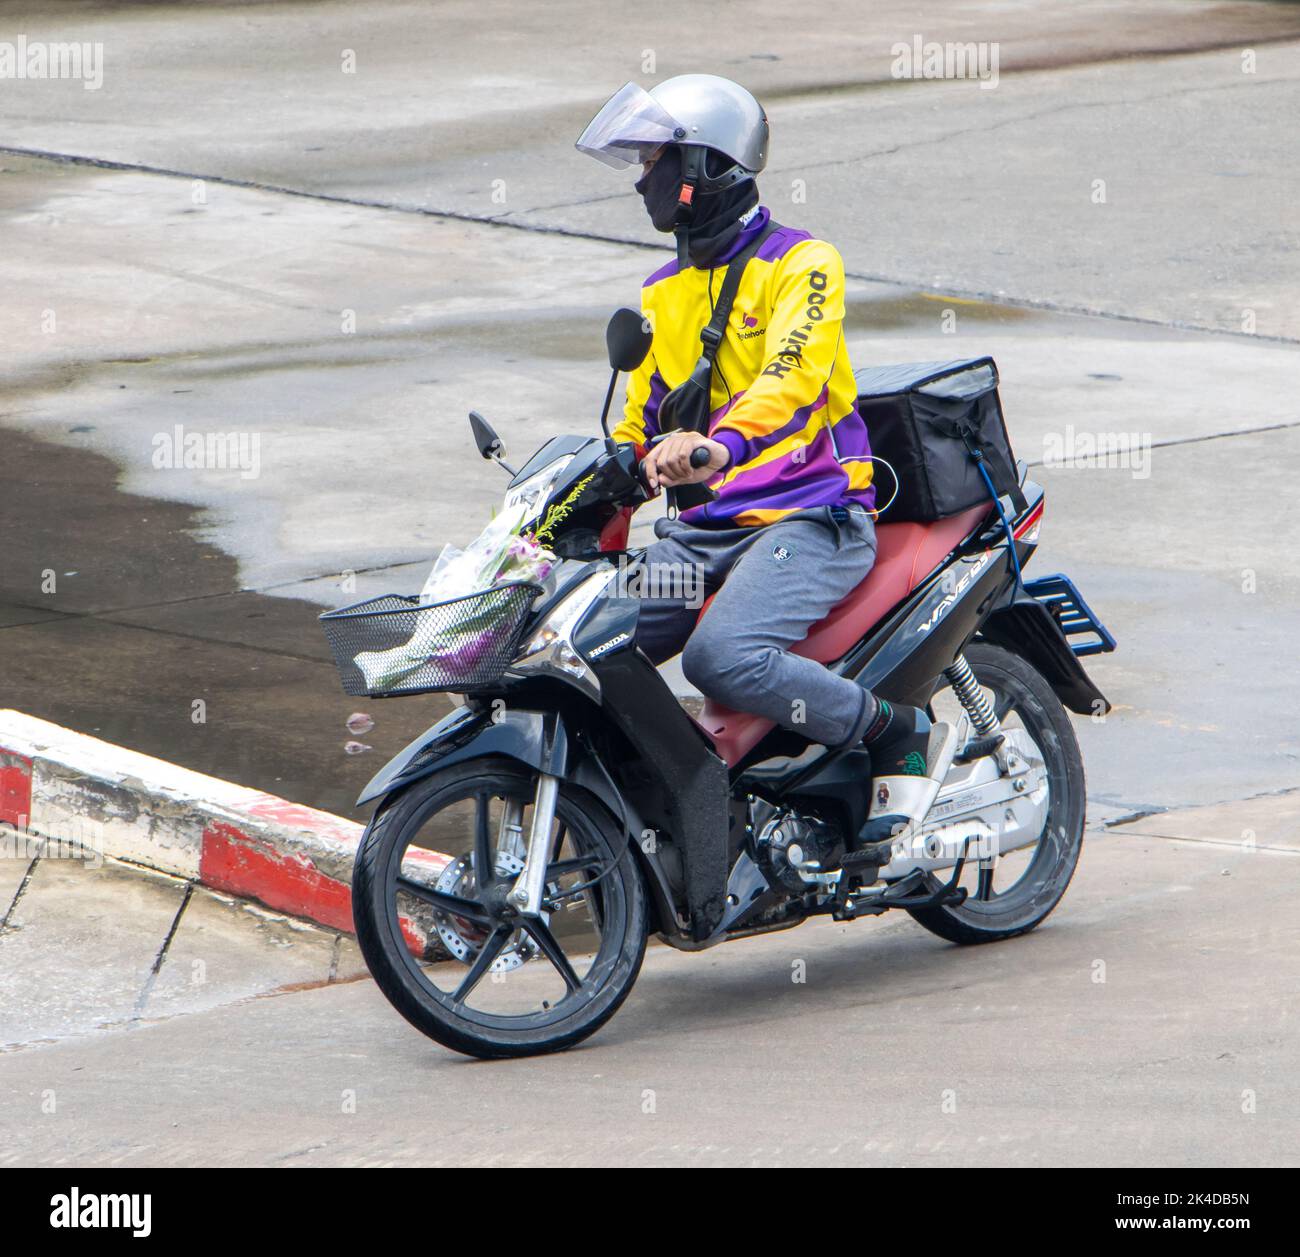 SAMUT PRAKAN, THAILAND, SEP 23 2022, A food delivery worker rides a motorcycle with a delivery box Stock Photo